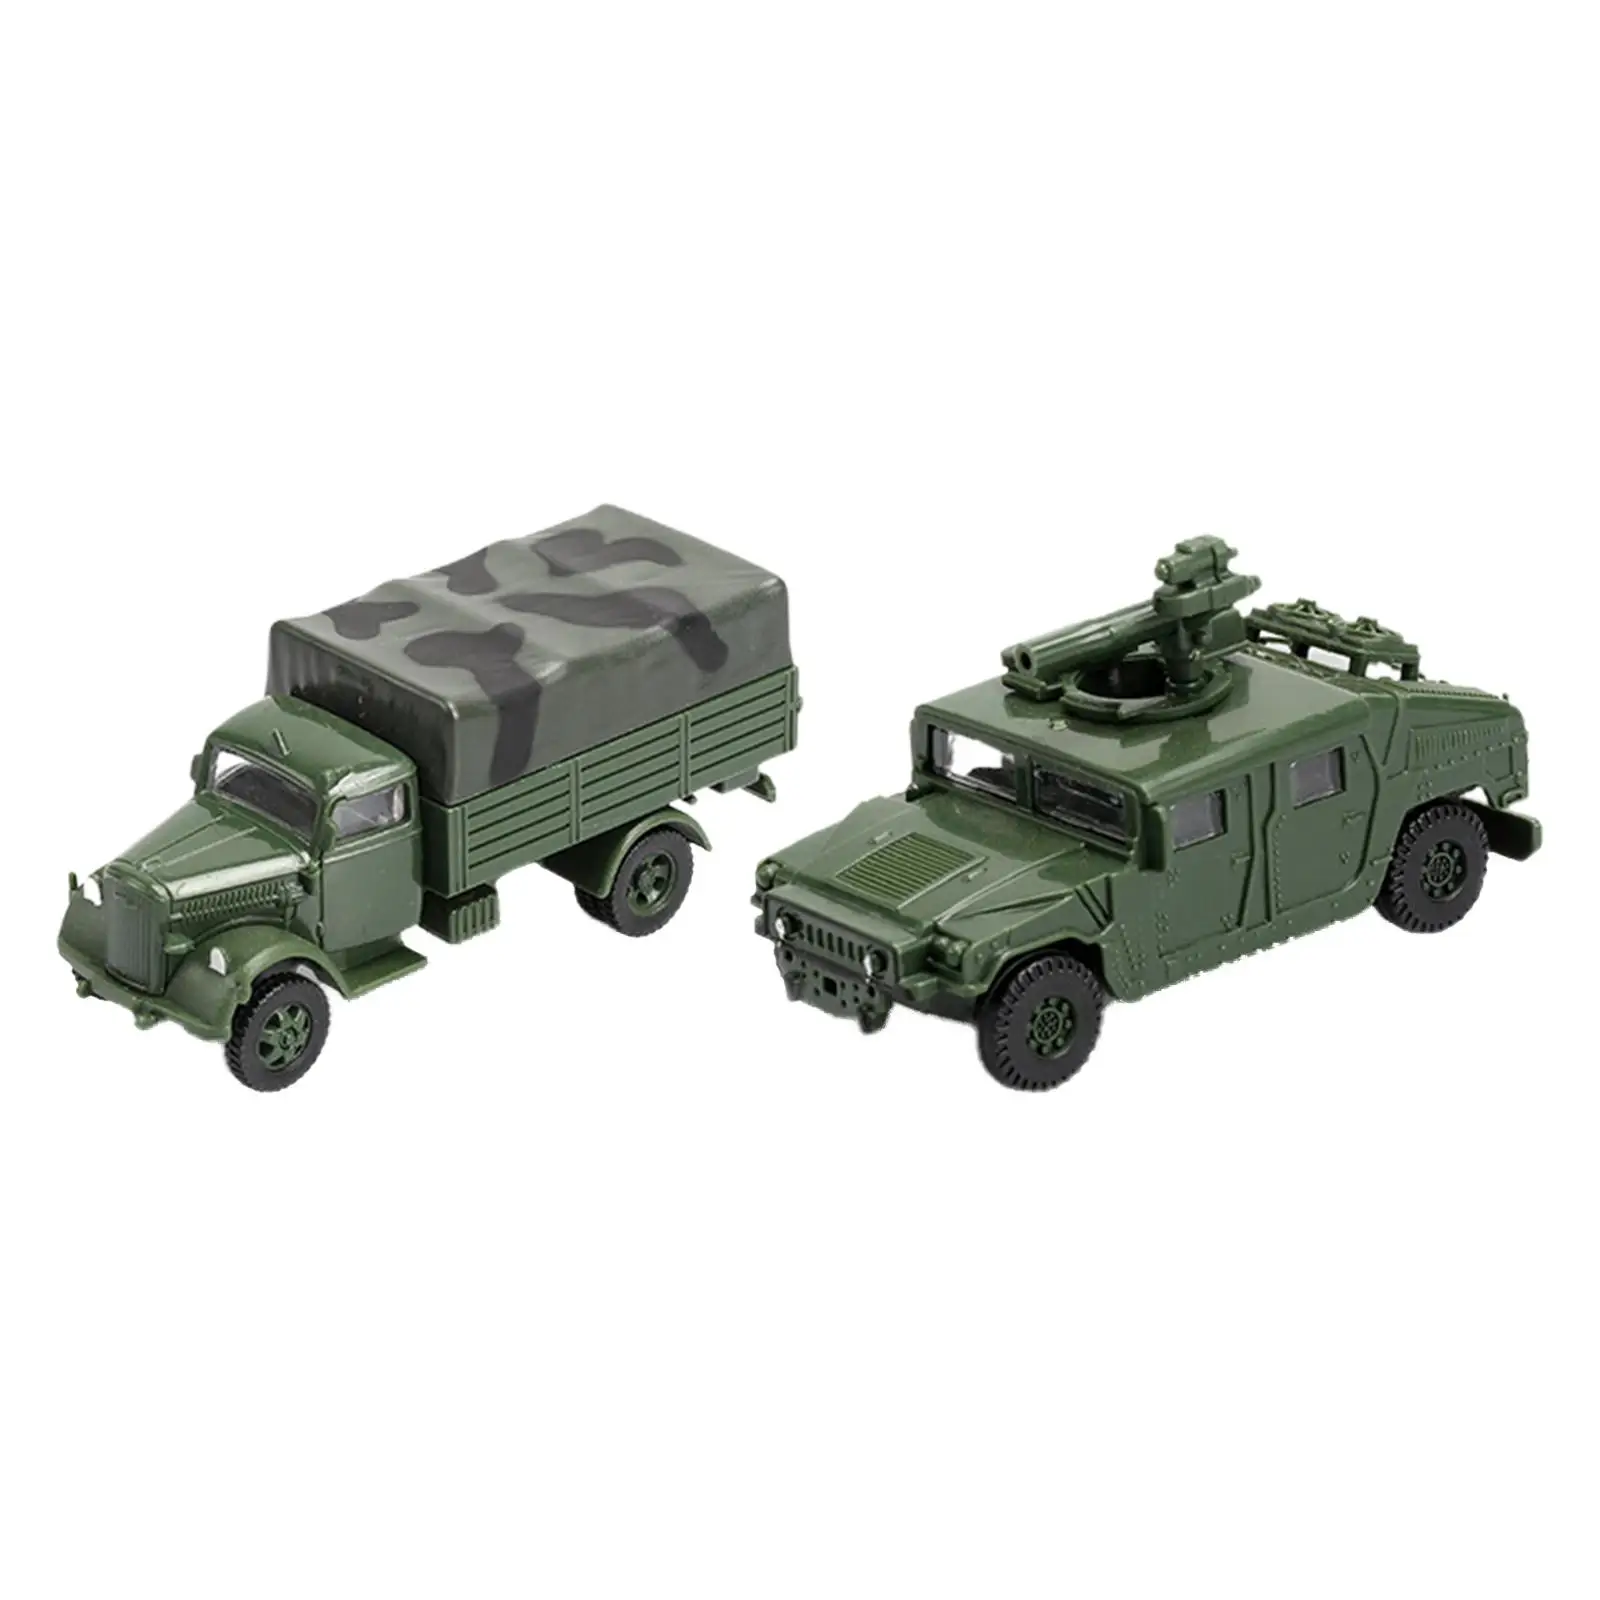 2 Pieces 1:72 Assemble American Humvee Kits Architecture Model for Tabletop